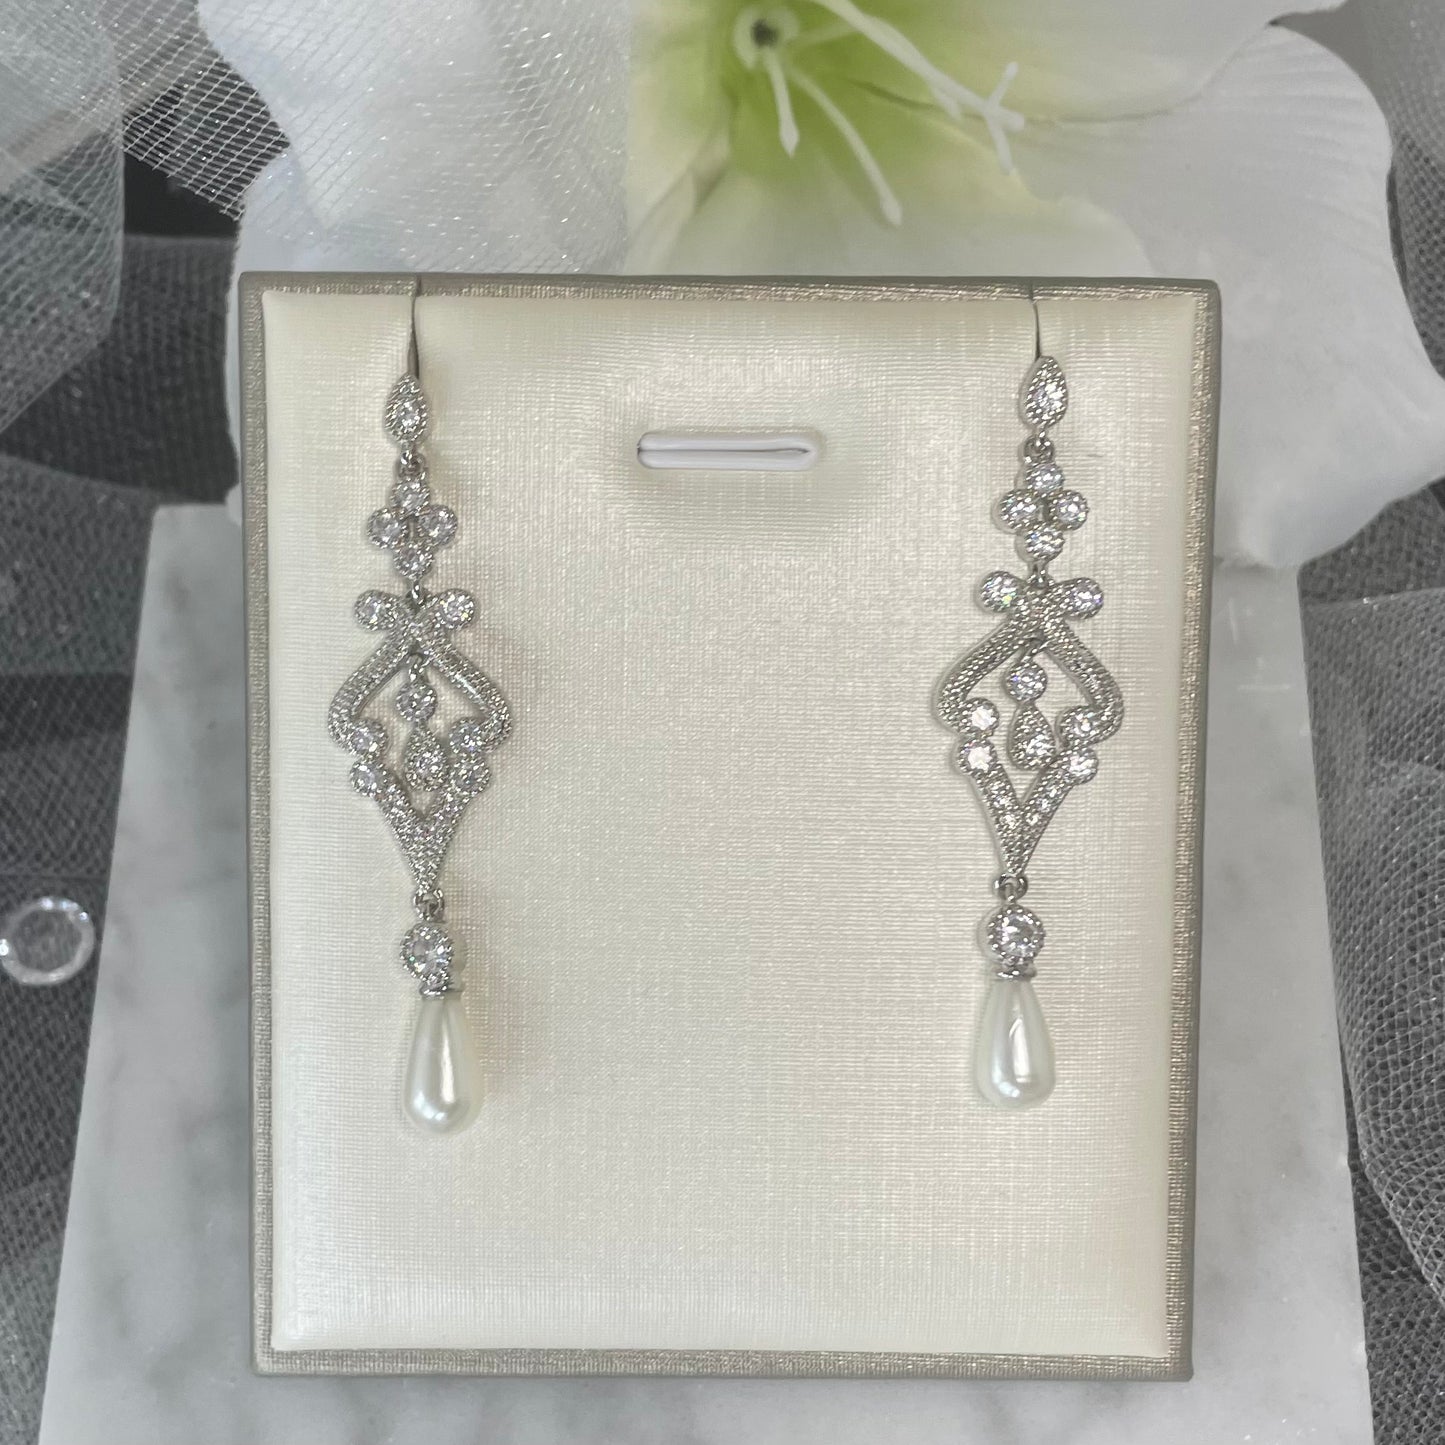 Elegant Maia Crystal Pearl Earring and Necklace Set with Indian-inspired design, ideal for adding cultural charm to bridal or wedding guest attire.